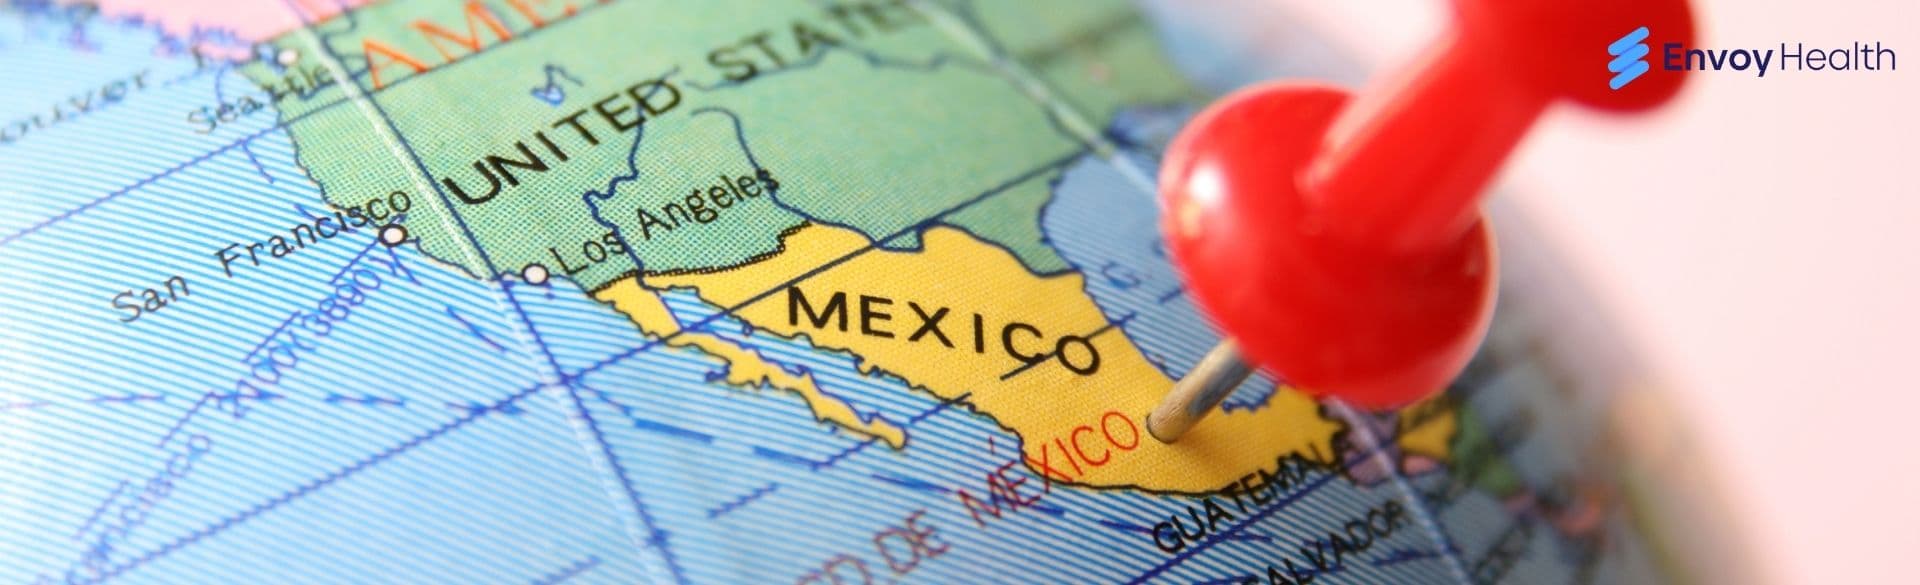 Patient Guide All on 4 Dental Implants Mexico